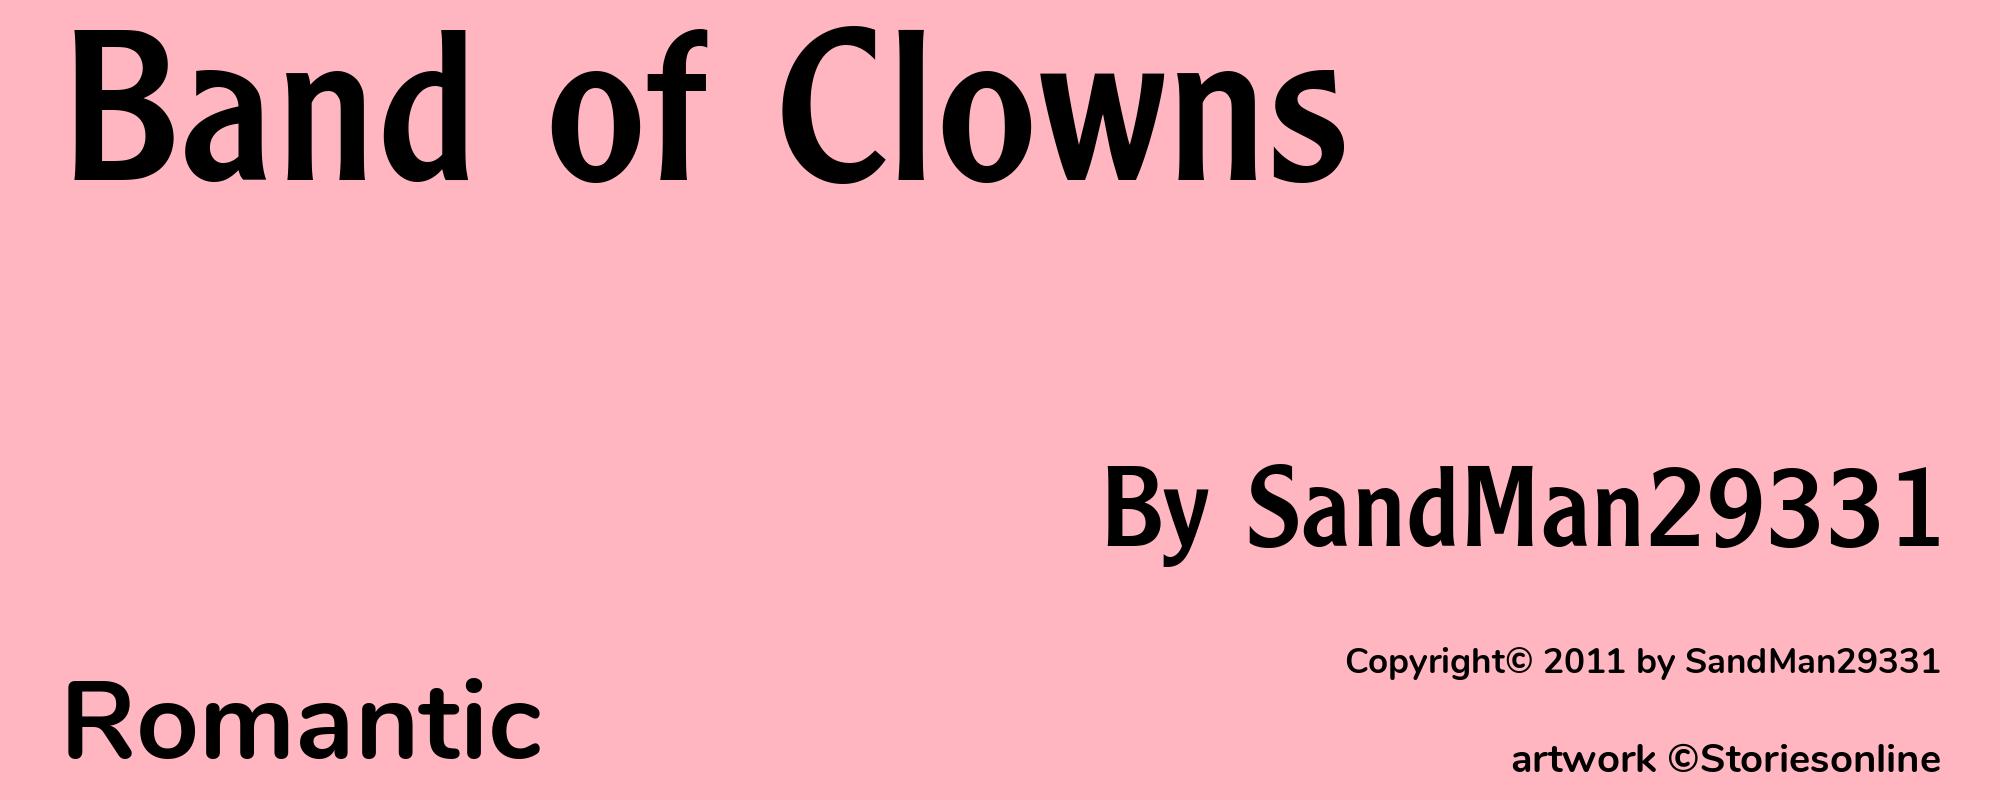 Band of Clowns - Cover